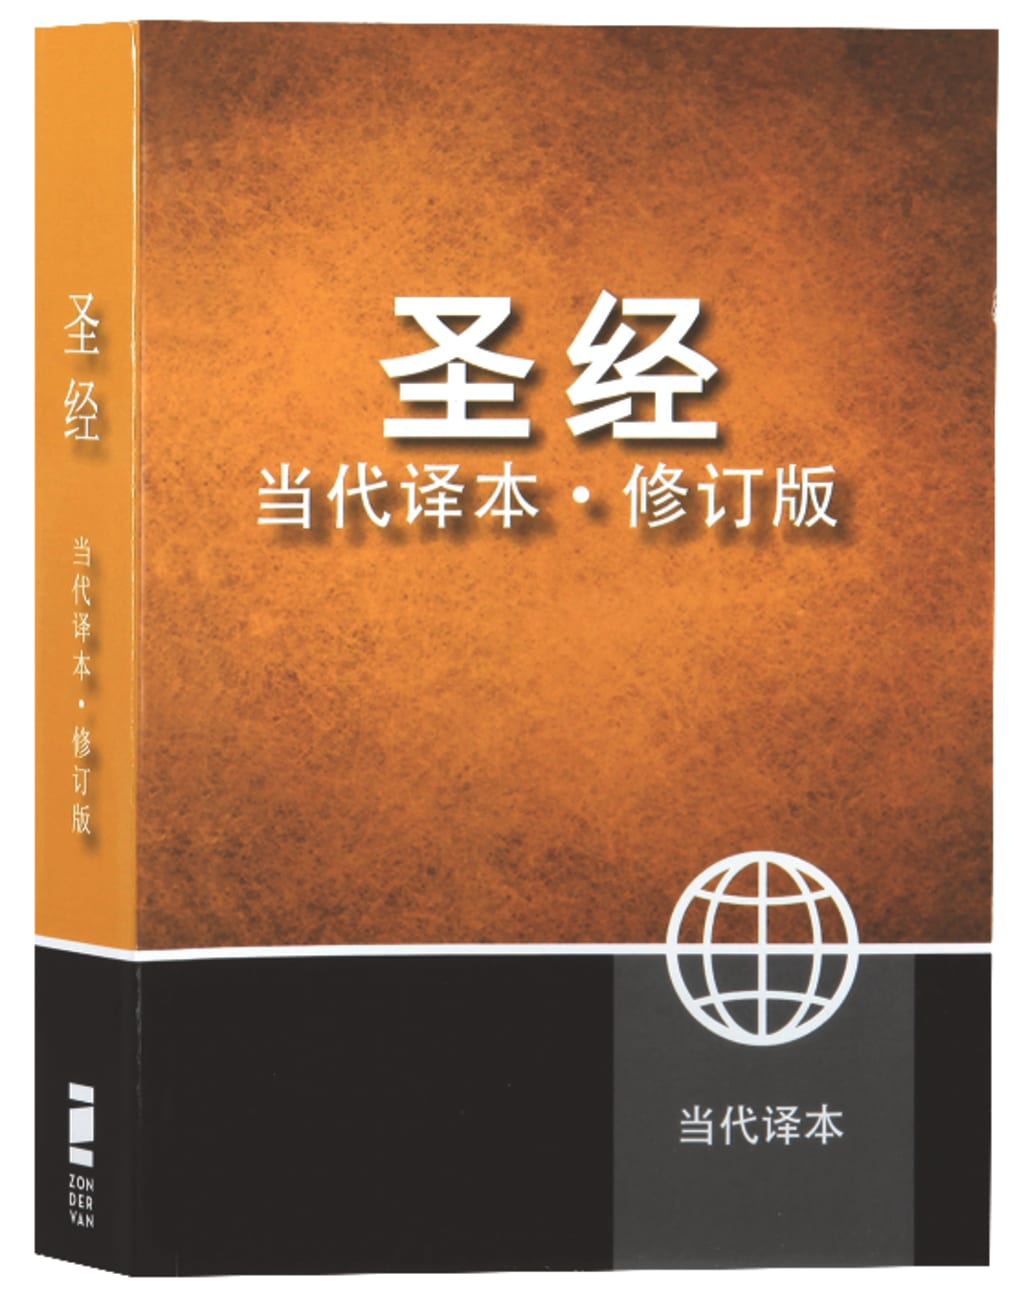 B CCB CHINESE SIMPLIFIED CONTEMPORARY LARGE PRINT BIBLE (BLACK LETTER EDITION)